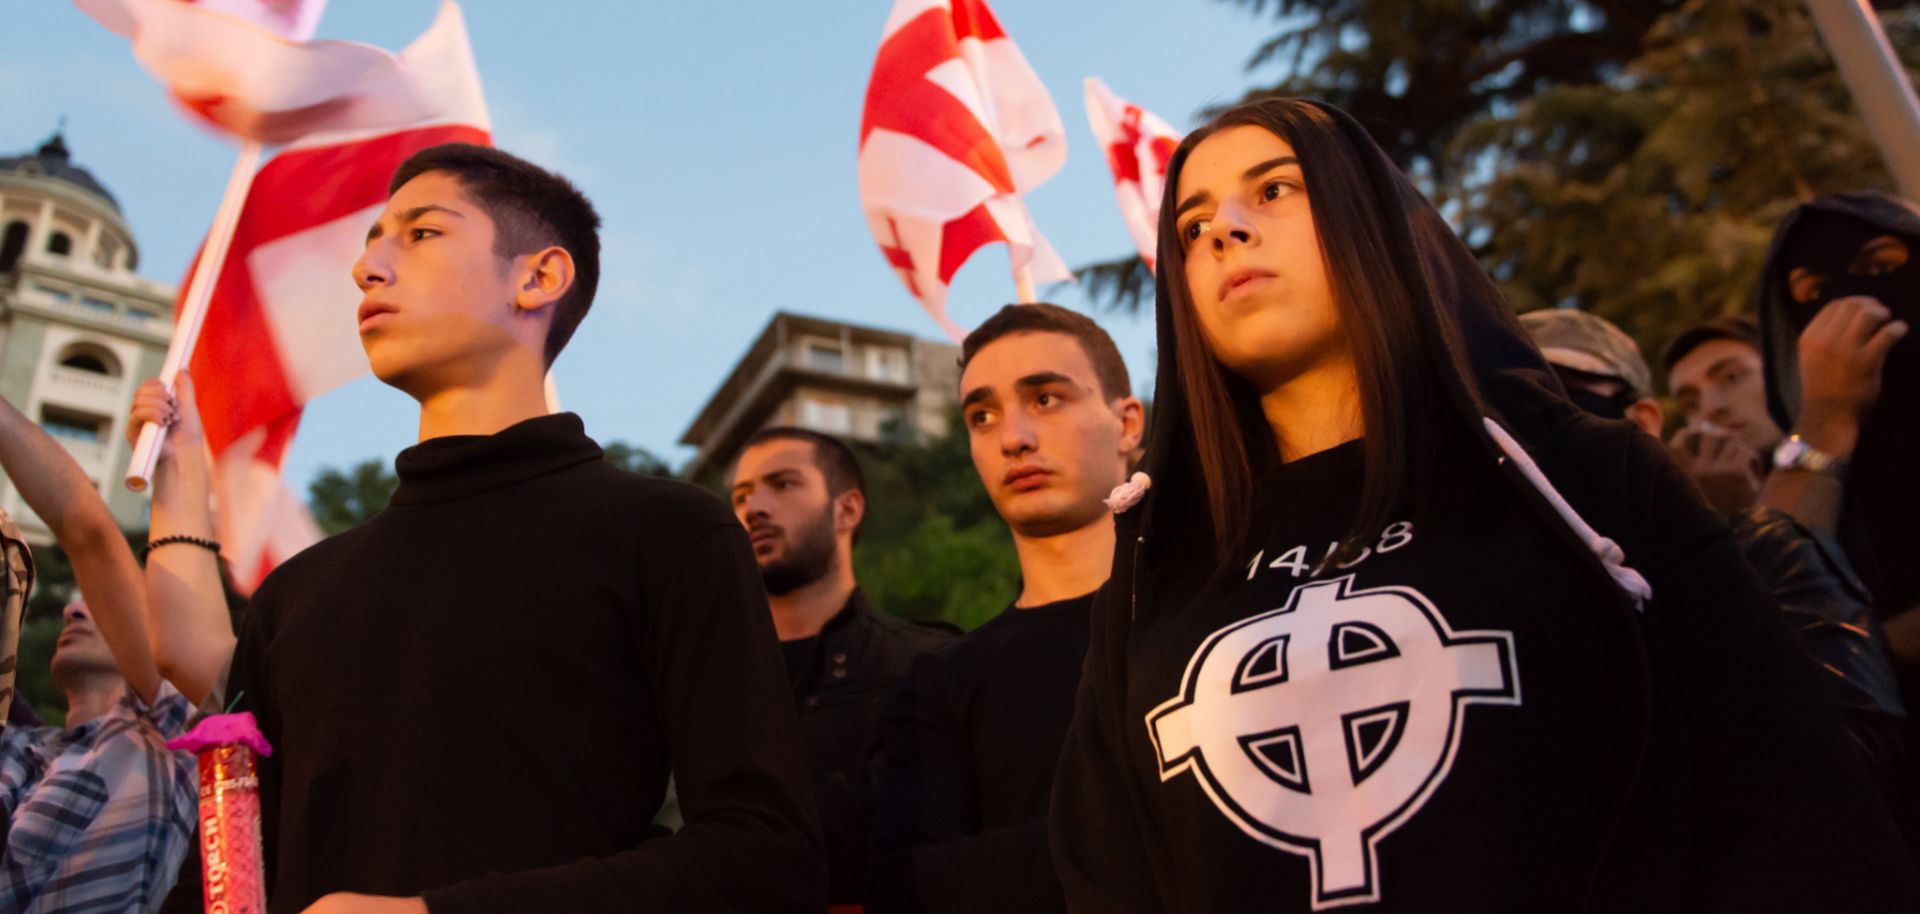 A young Georgian, right, wears a T-shirt with the Stormfront logo and the number 14/88 during a September 2016 rally. The number 14 denotes David Lane’s 14-word white supremacist mantra while 88, as the eighth letter of the alphabet, signifies HH, which stands for Heil Hitler.